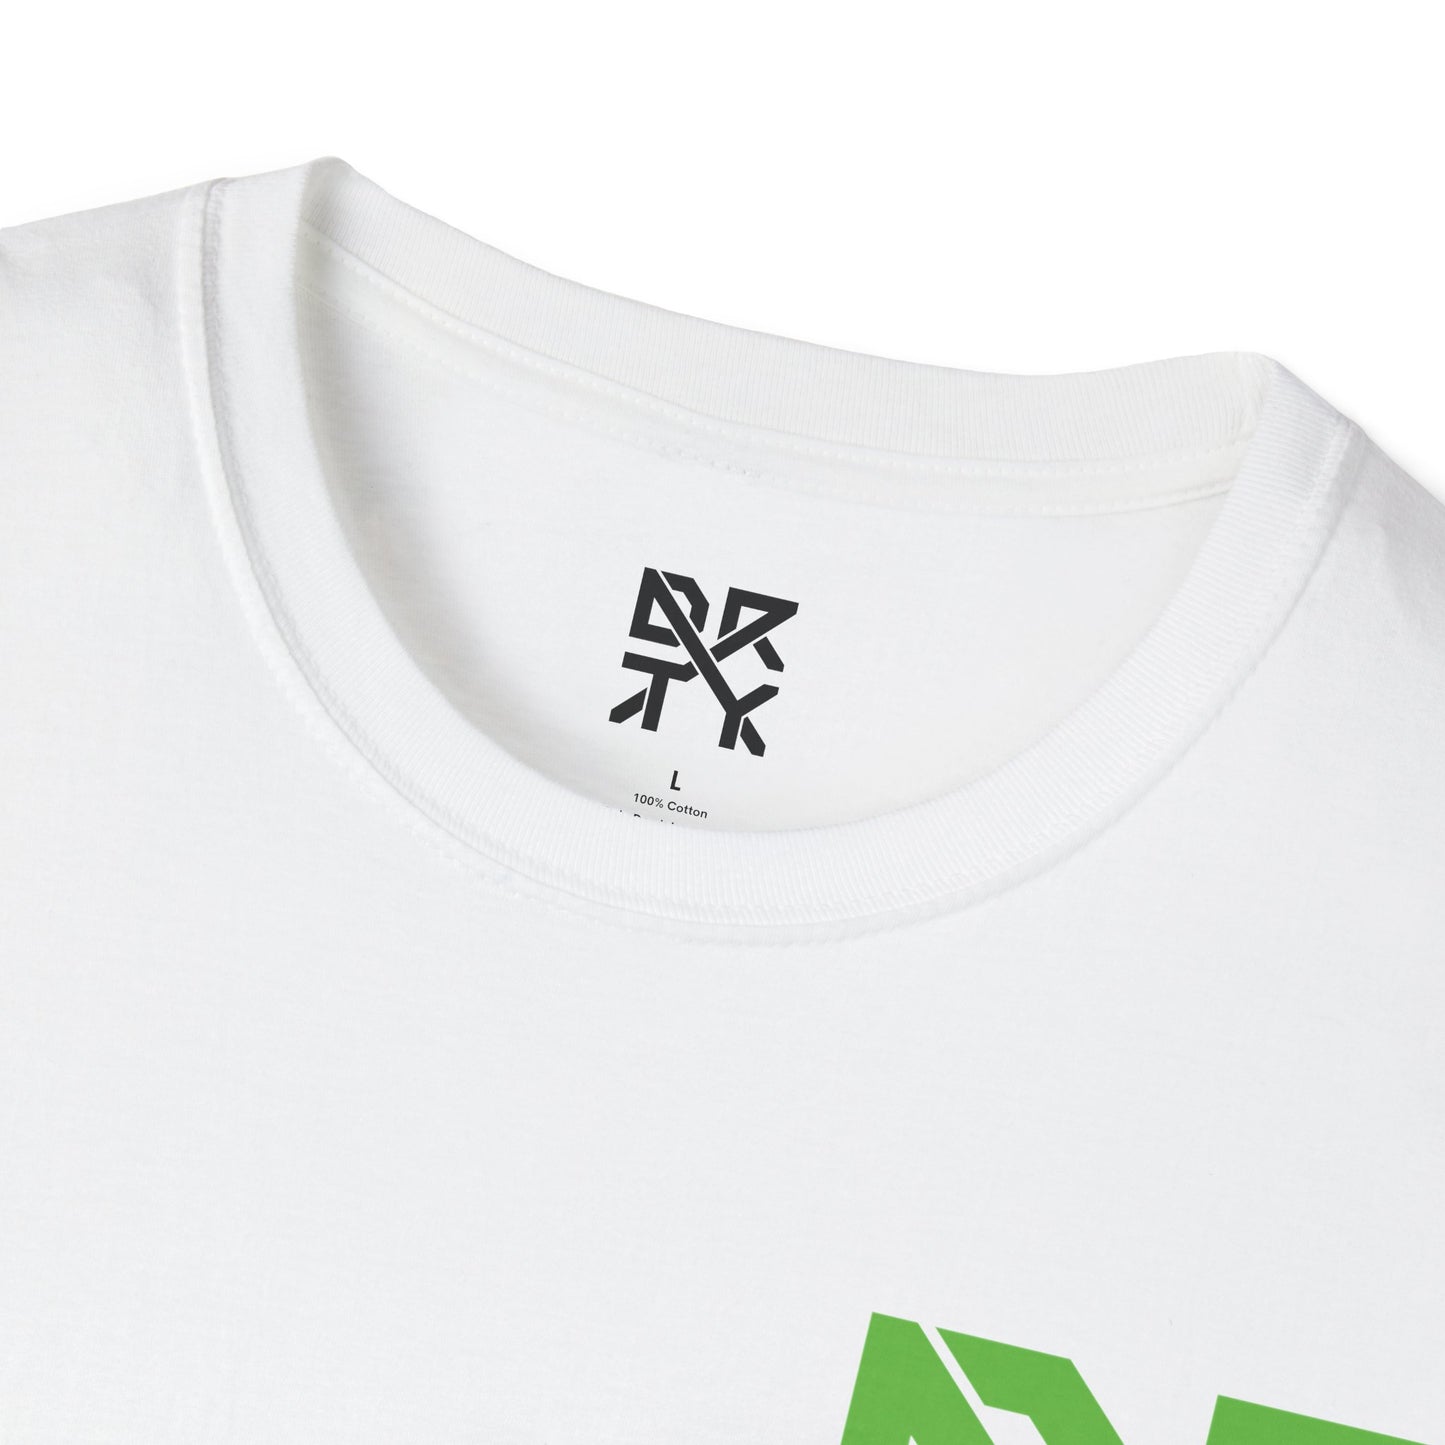 This image showcases the inside view of a T-shirt collar with a DRTY X logo printed on the inside.